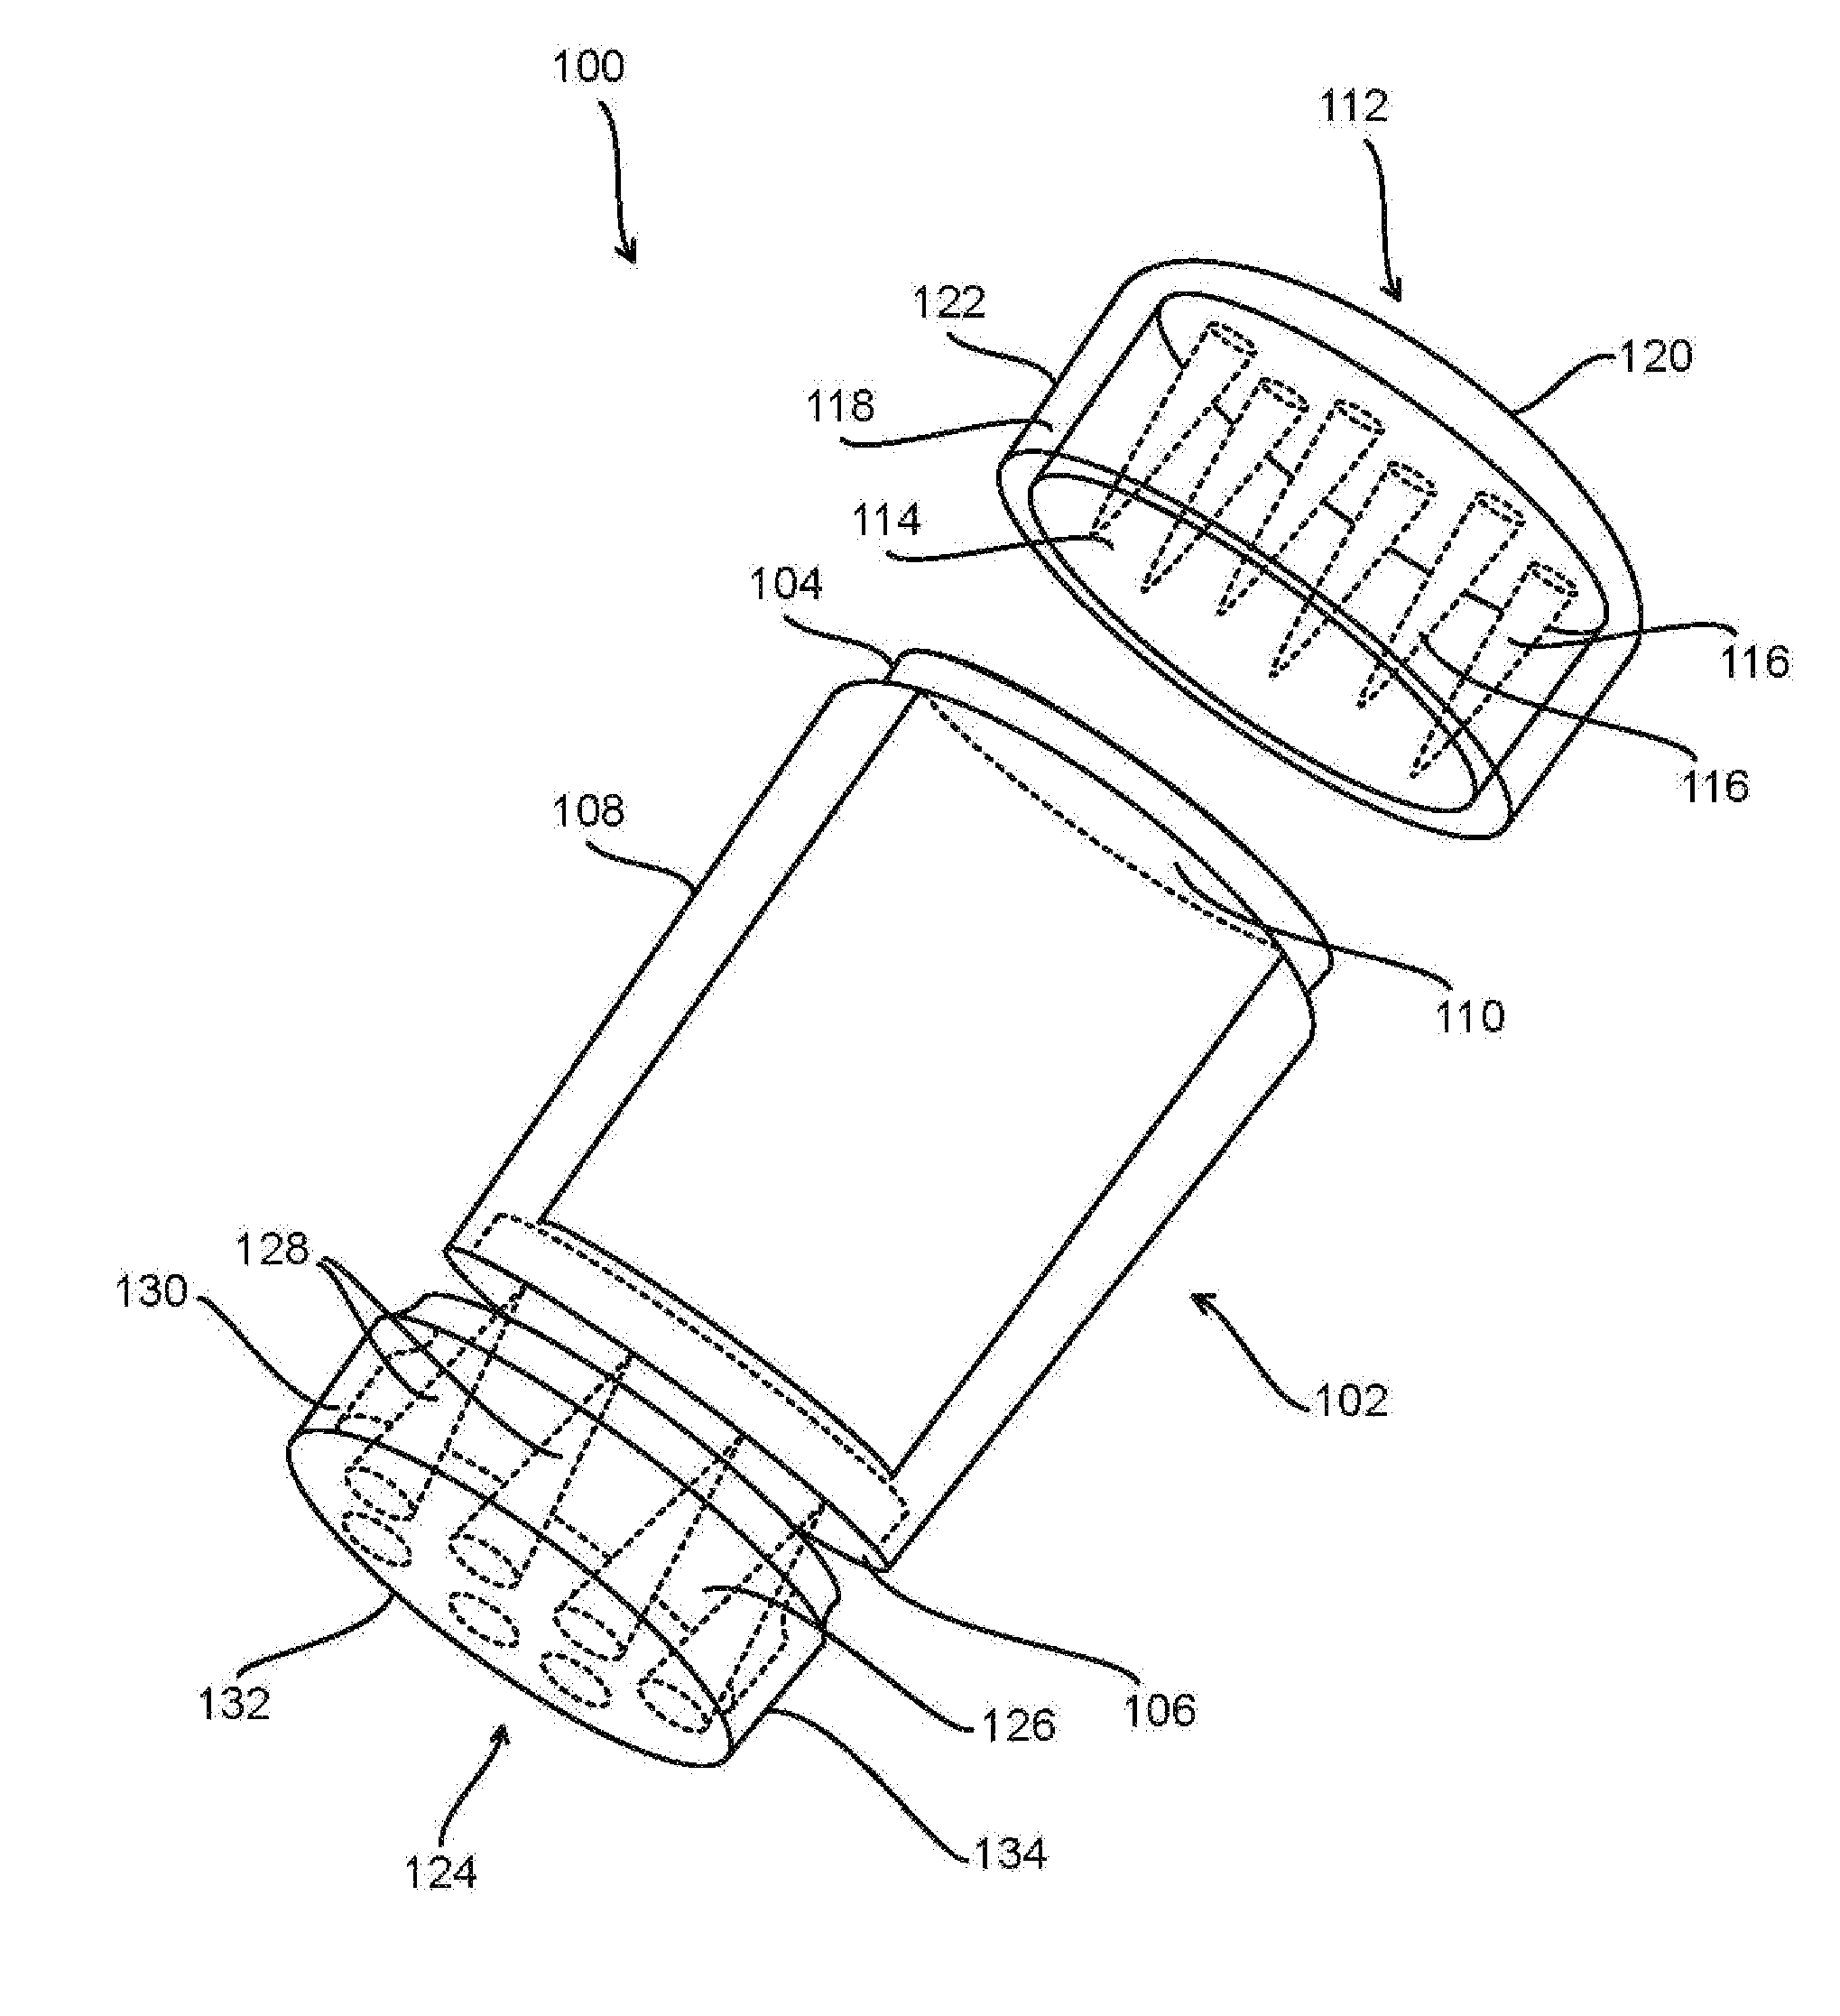 Device and Method for Airtight Storage and Grinding of Herbs